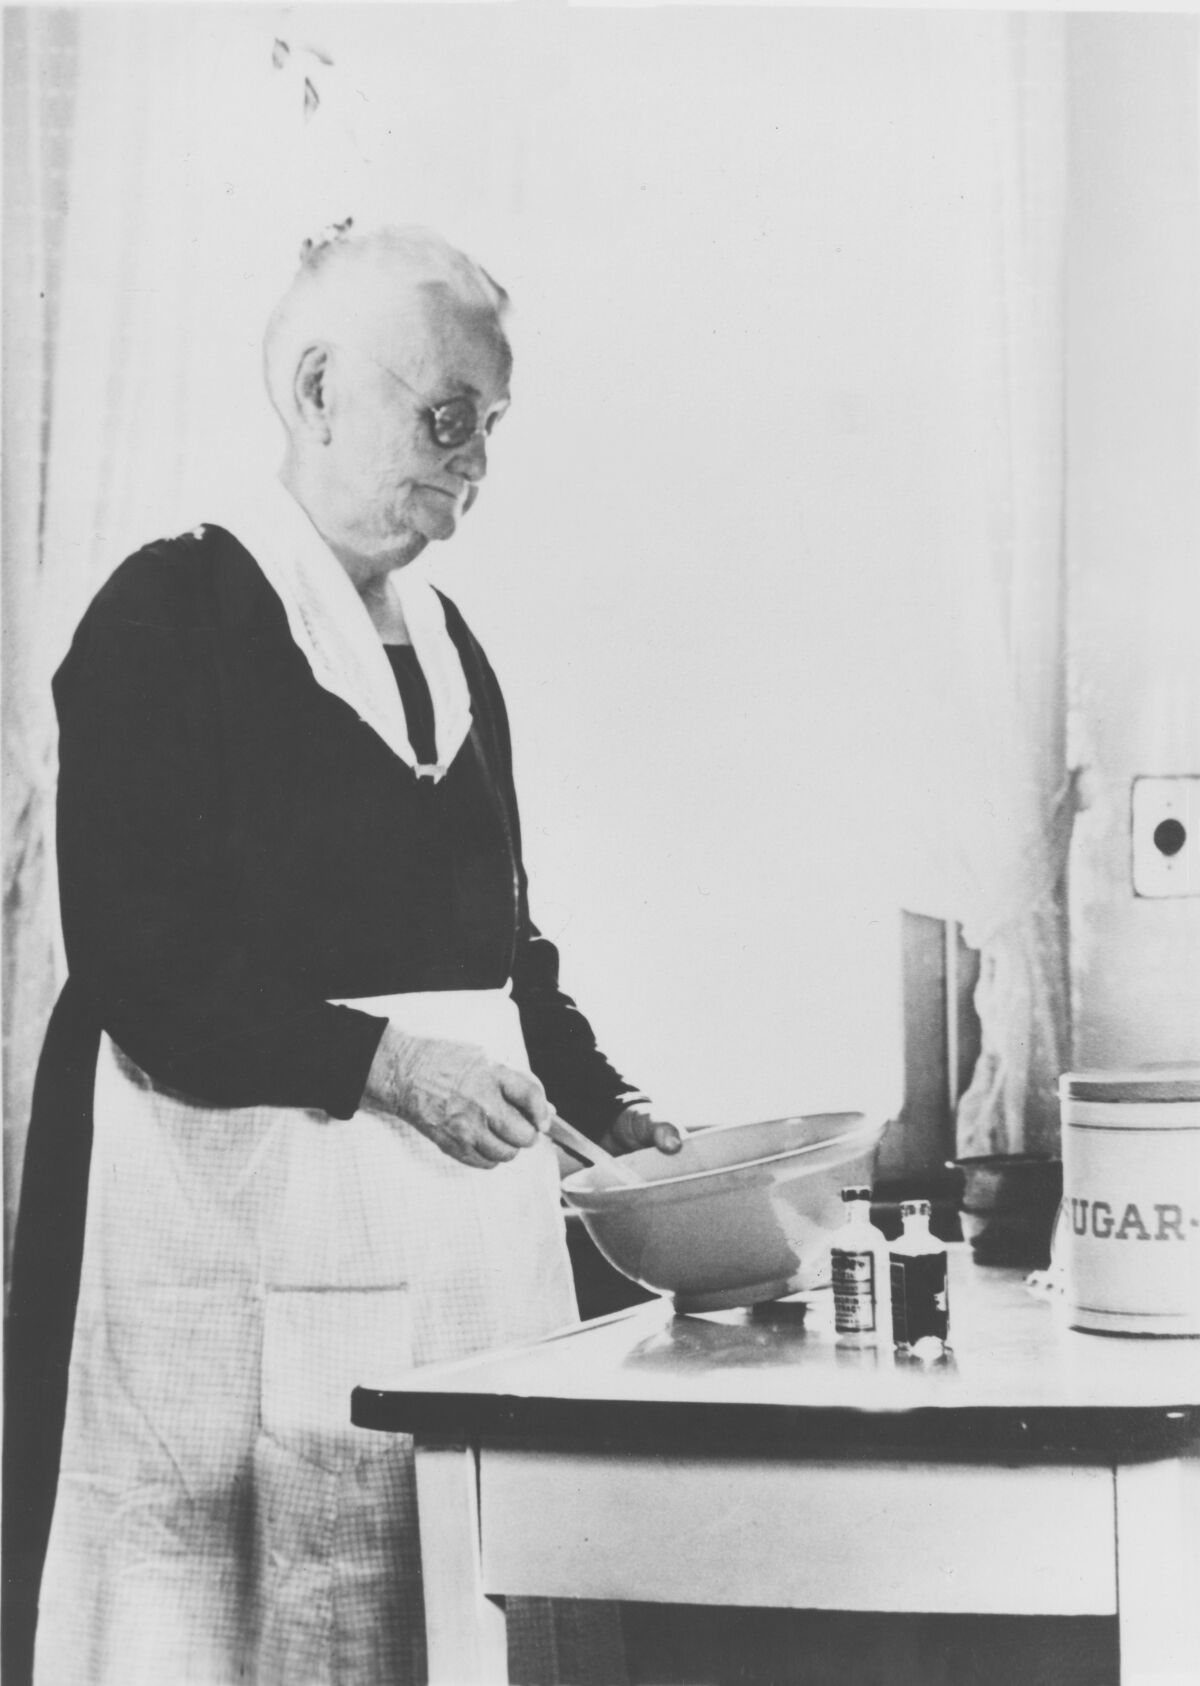 A black and white photograph of Mary See working in the kitchen